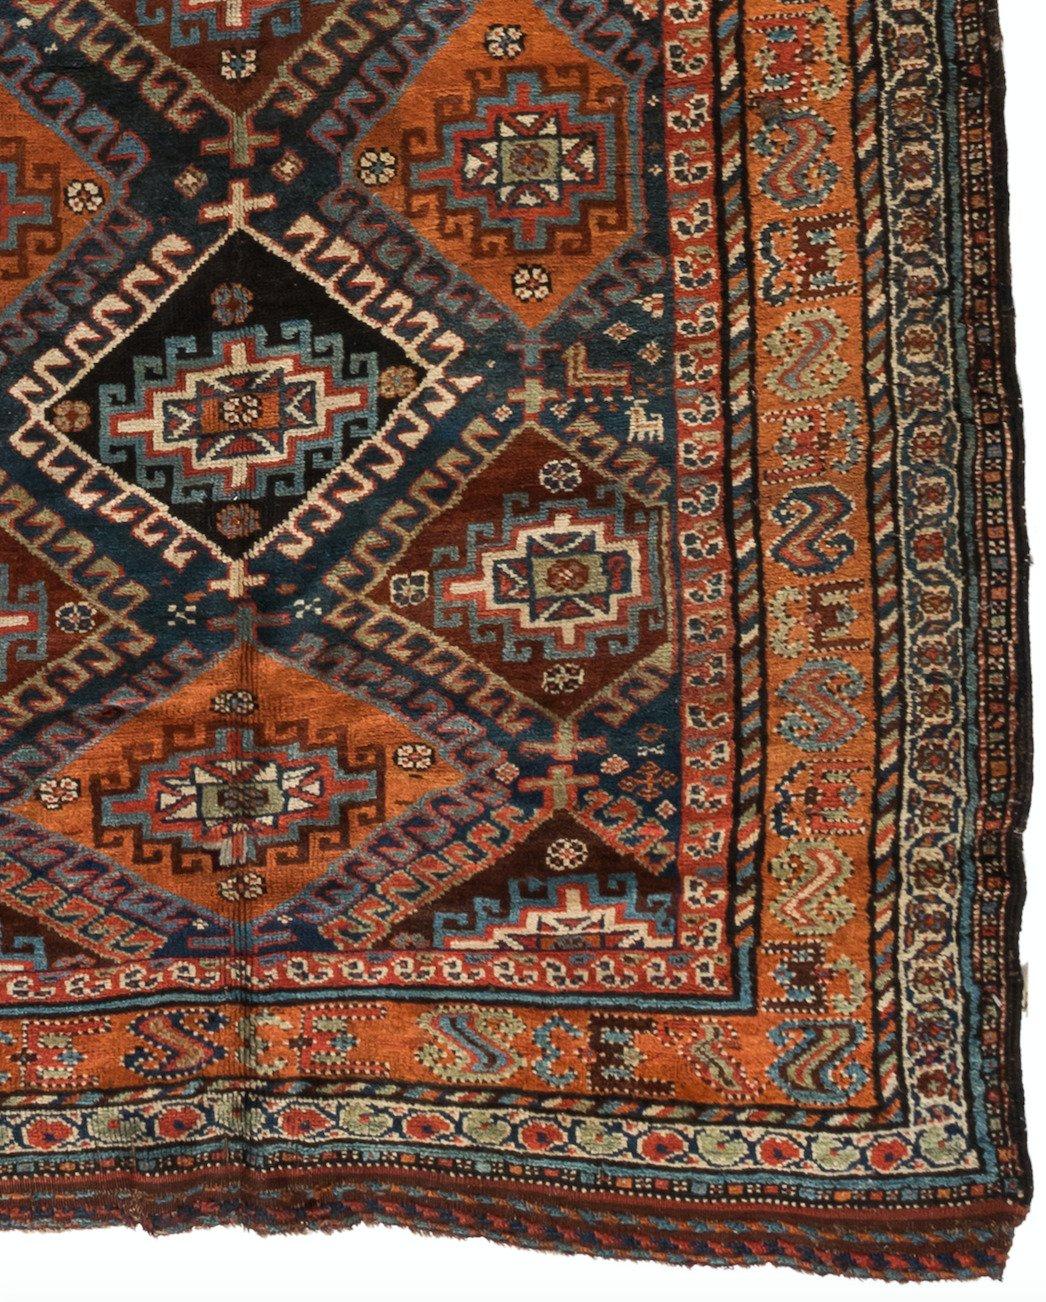 Antique Green Blue Tribal Geometric Persian Kurd Area Rug, circa 1920s-1930s In Good Condition For Sale In New York, NY